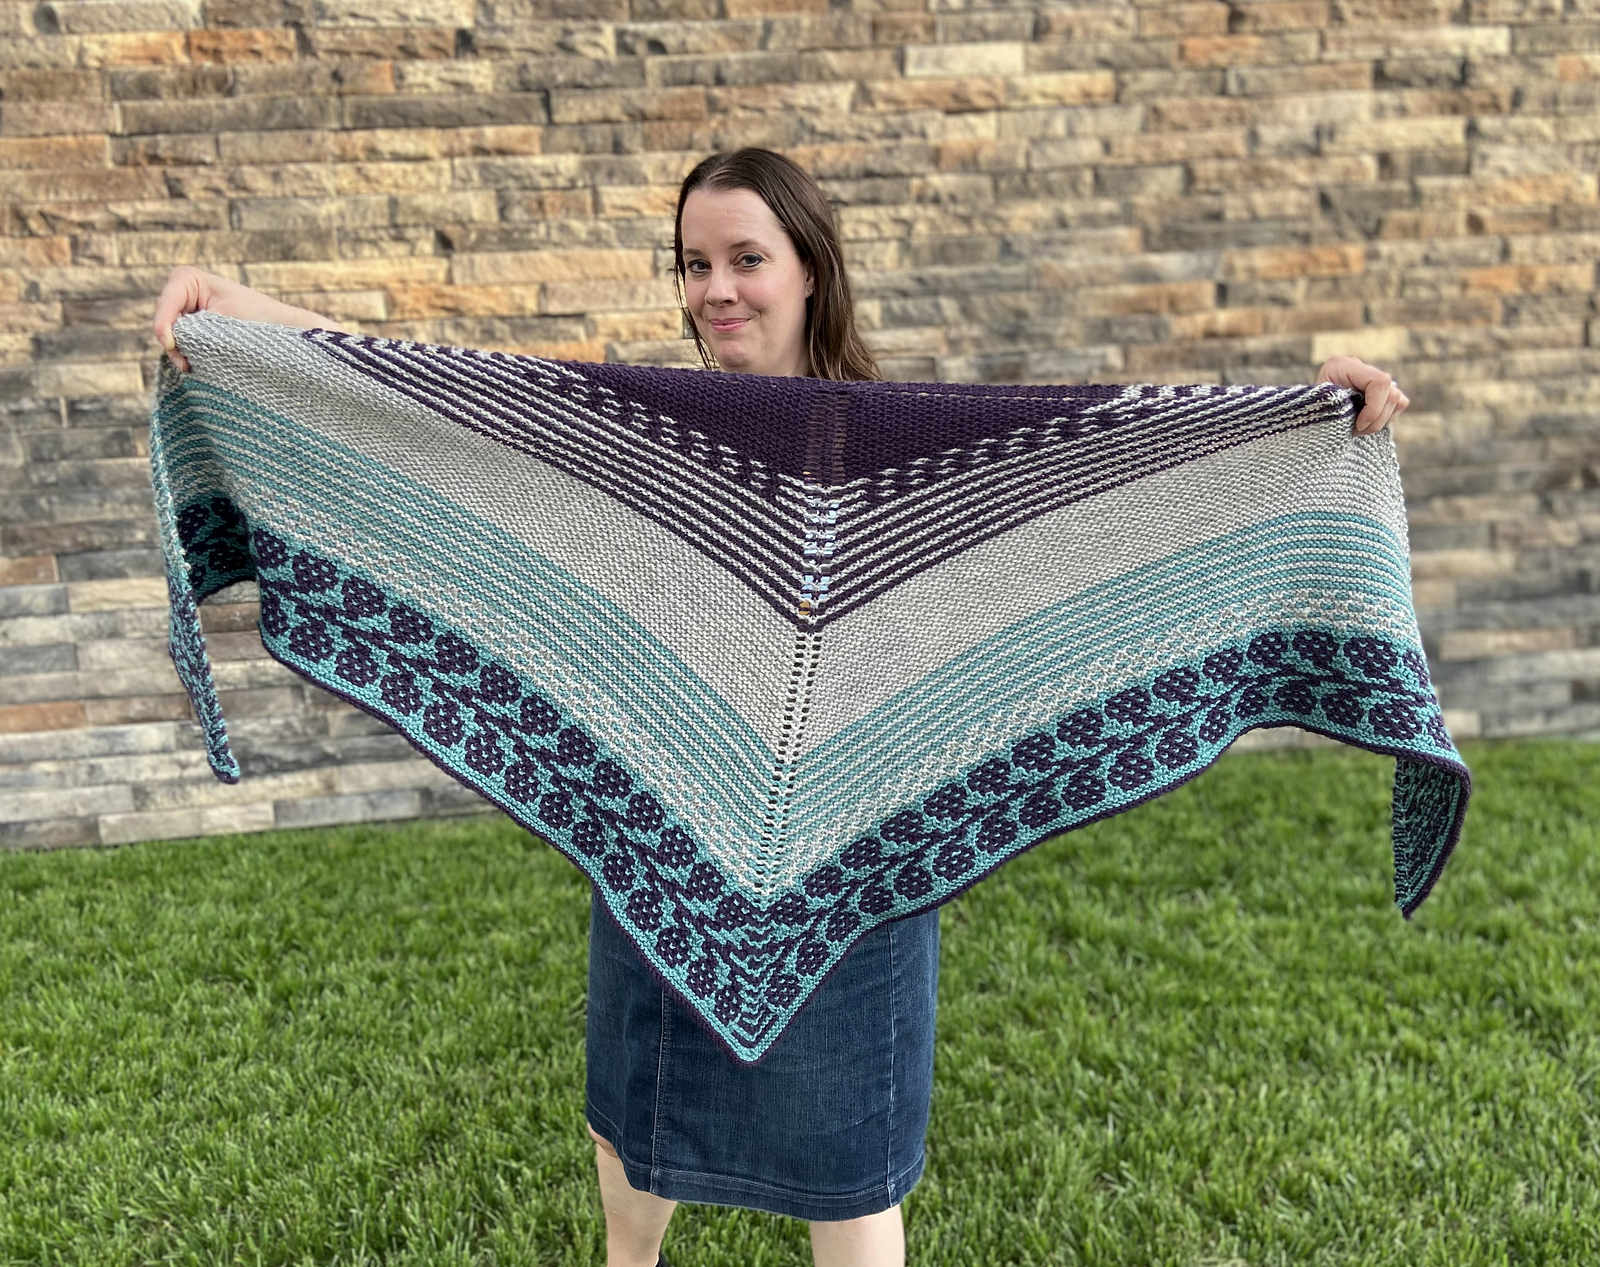 hand knit shawl in shades of blue, cream, and purple and featuring colorwork patterning and striping